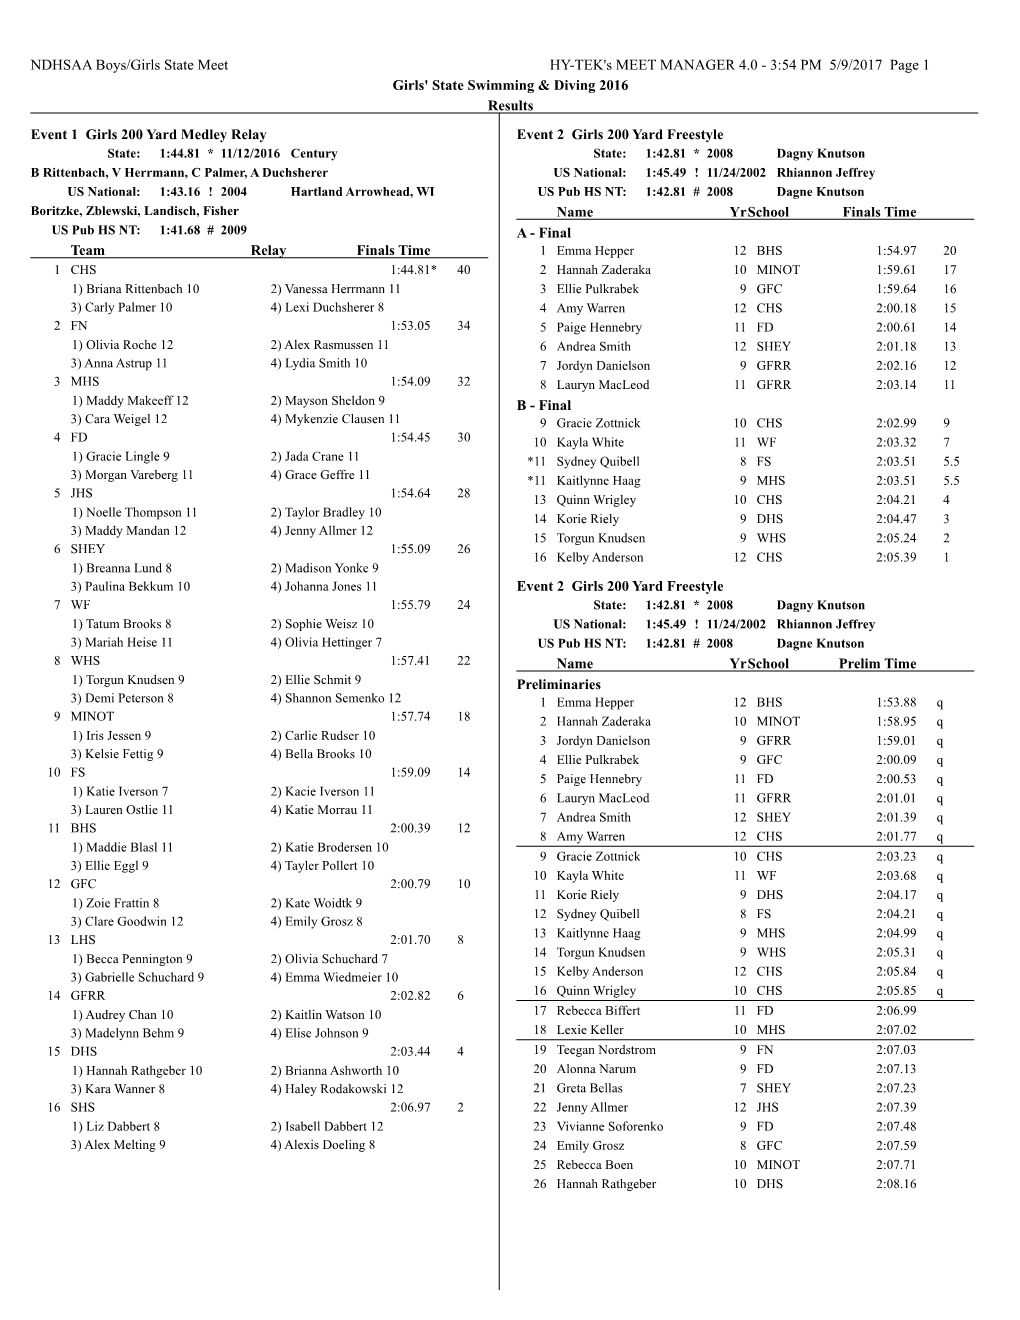 NDHSAA Boys/Girls State Meet HY-TEK's MEET MANAGER 4.0 - 3:54 PM 5/9/2017 Page 1 Girls' State Swimming & Diving 2016 Results